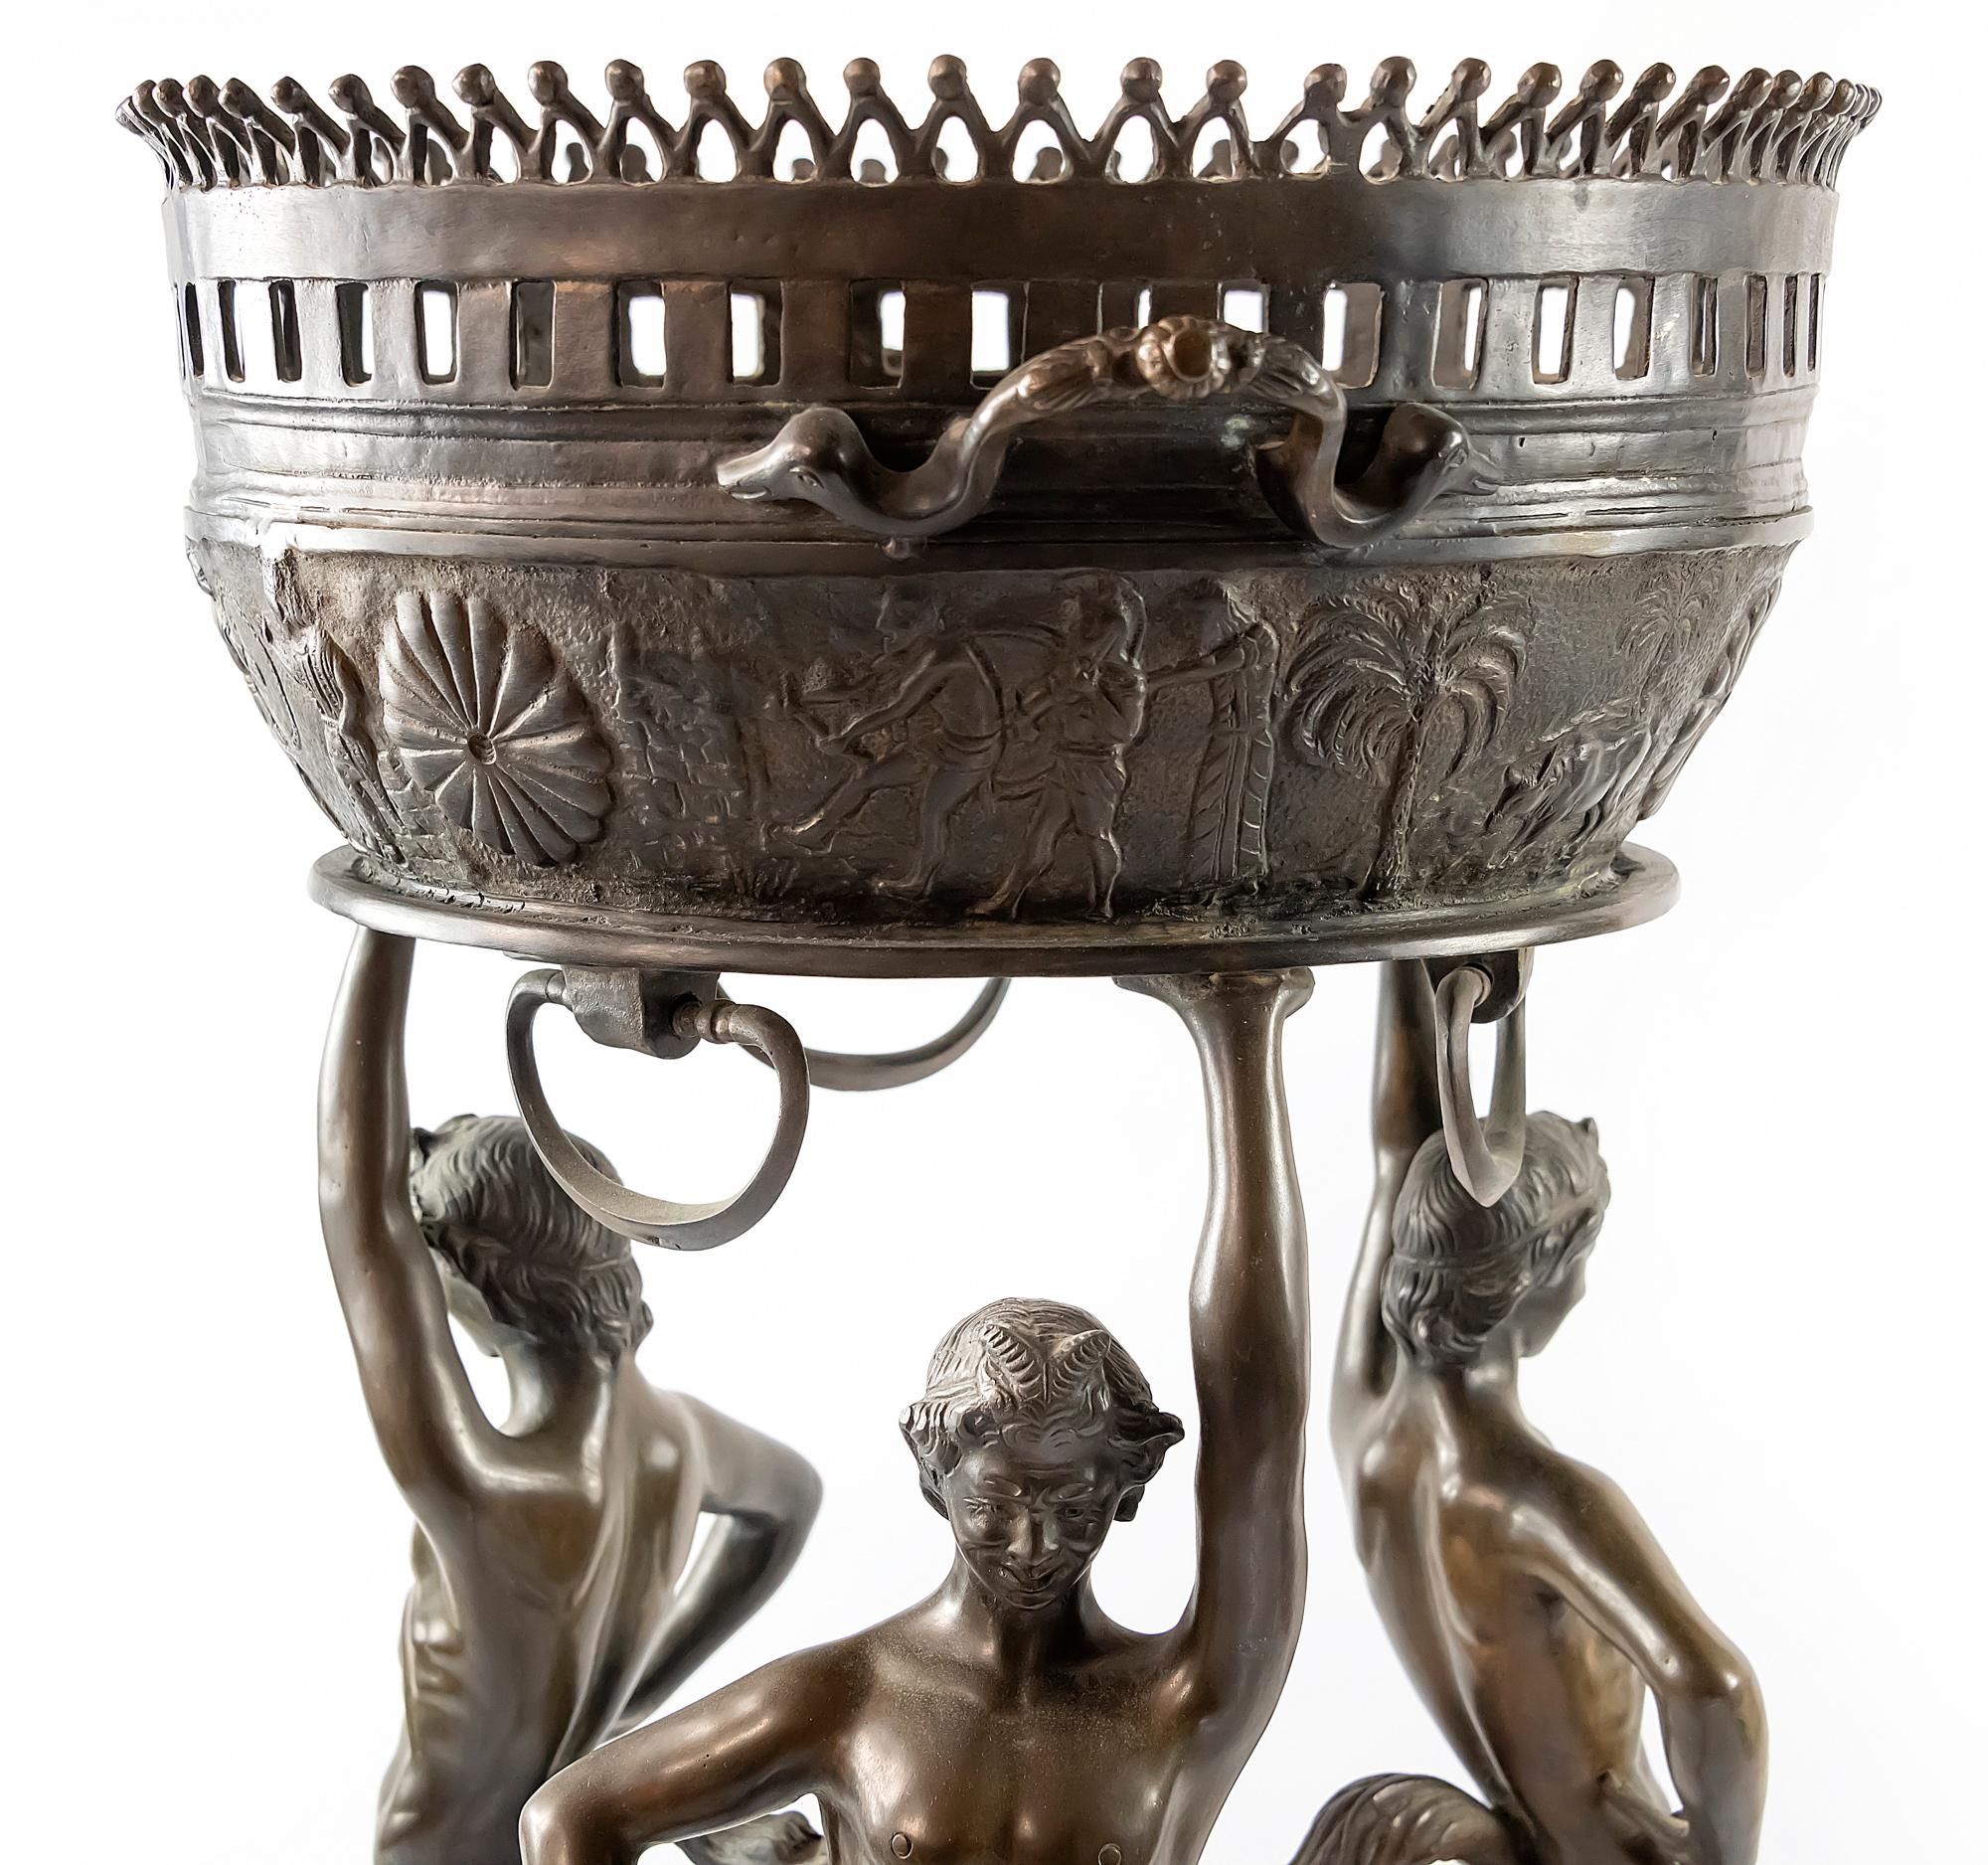 Classical bronze jardinière / planter with handles on legs by three male figures of Satyr. Bronze is patinated. Pot is decorated with antique scenes. Its is heavy and stable.